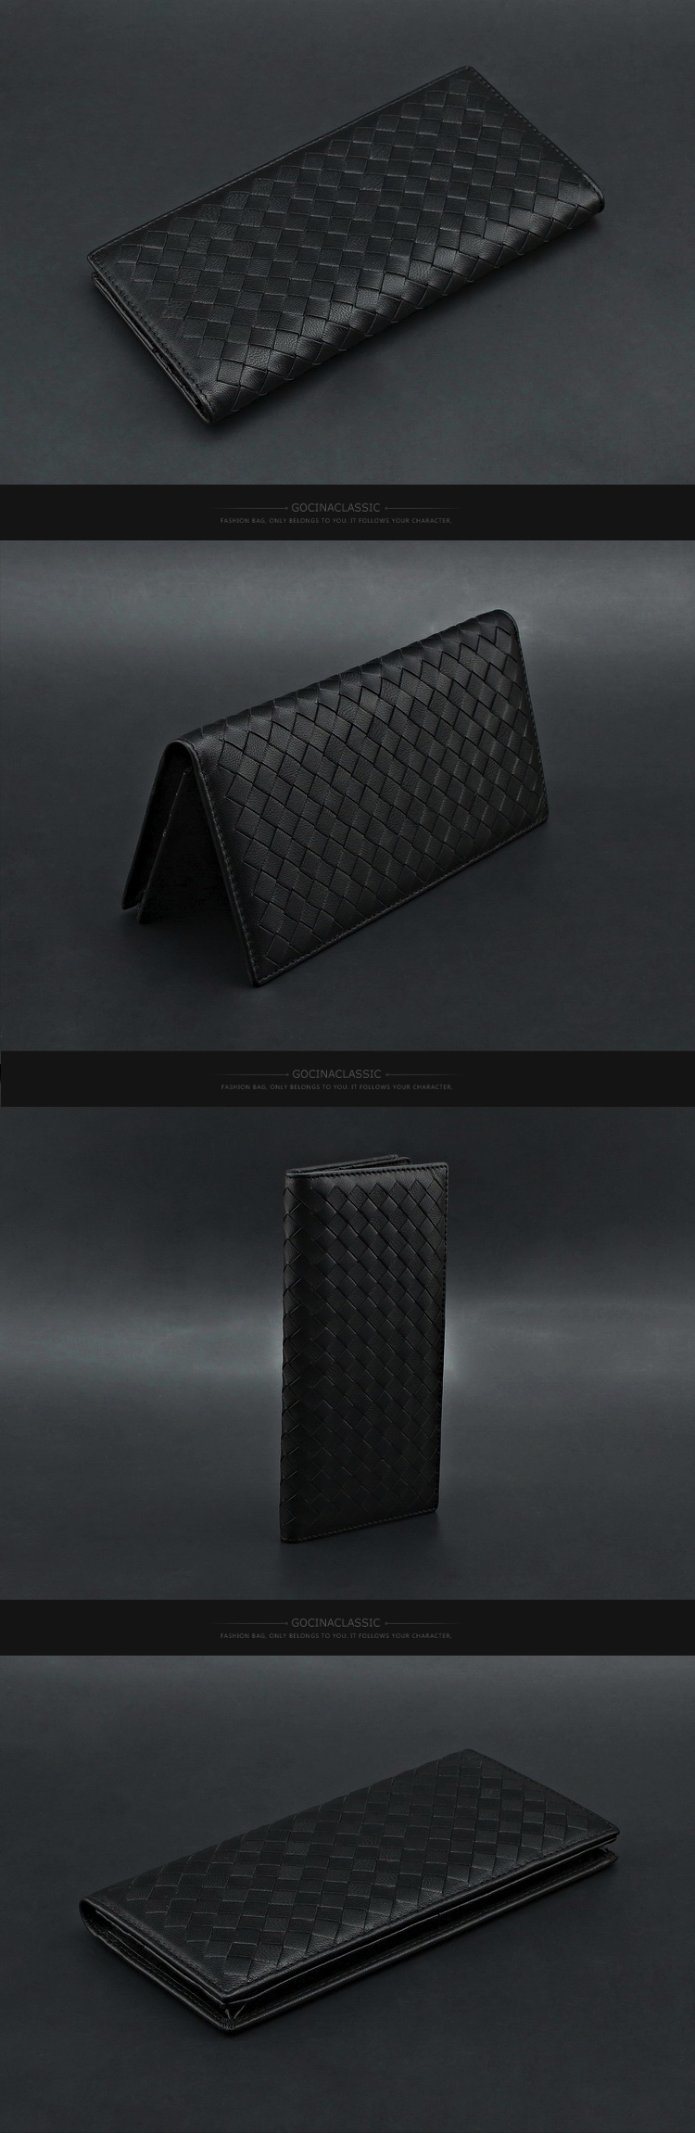 Hot Selling Genuine Leather Purse Long Wallet for Business Men